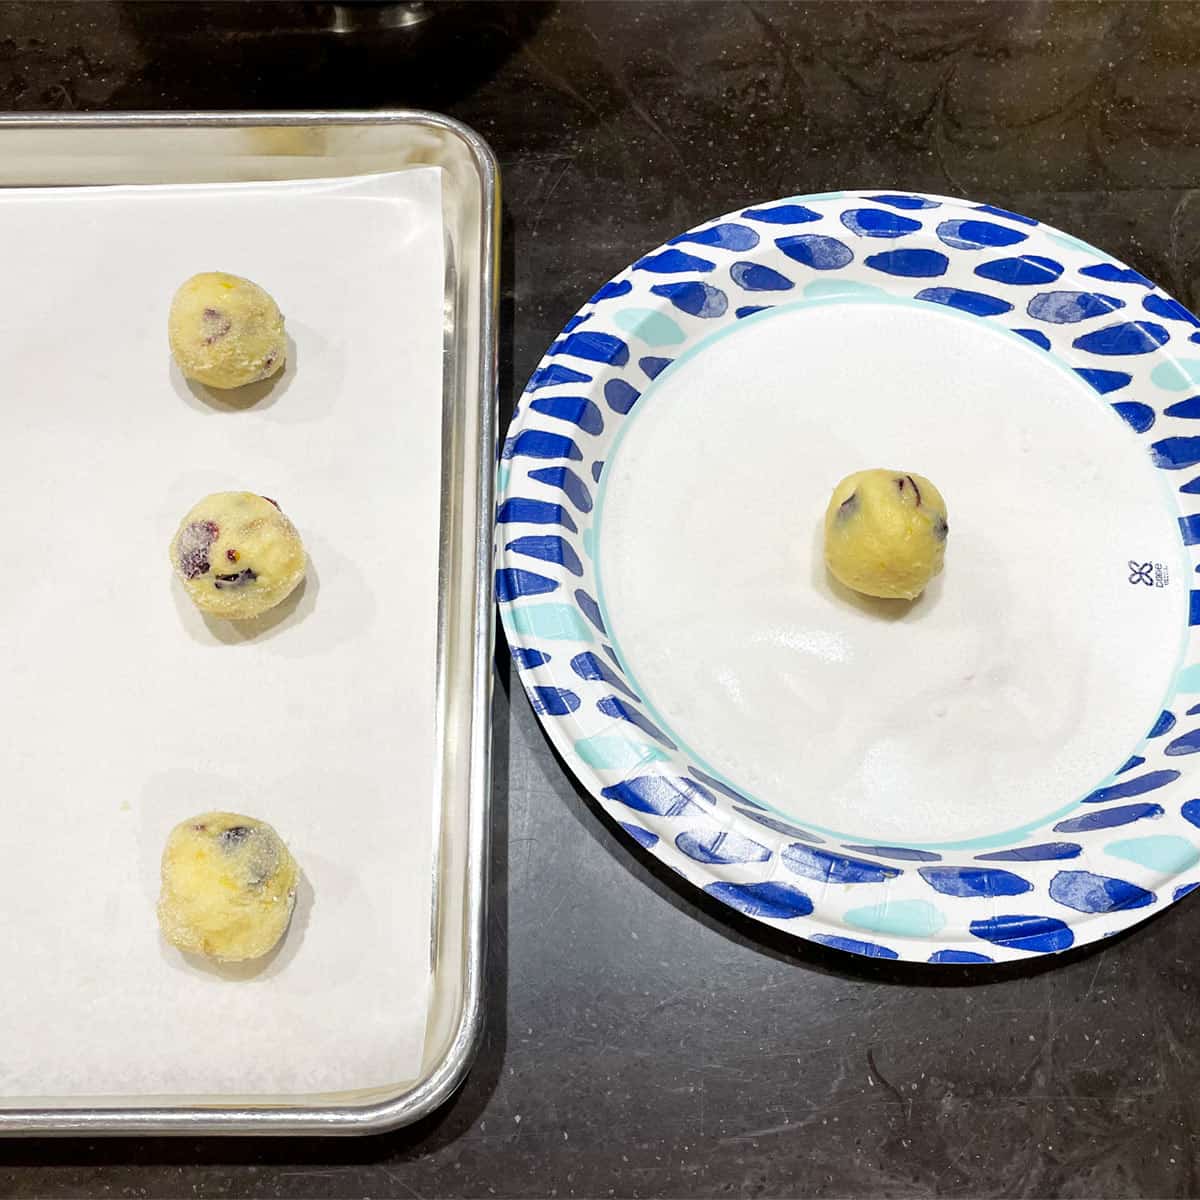 Plate with super fine sugar so you can roll cookie dough balls before baking.